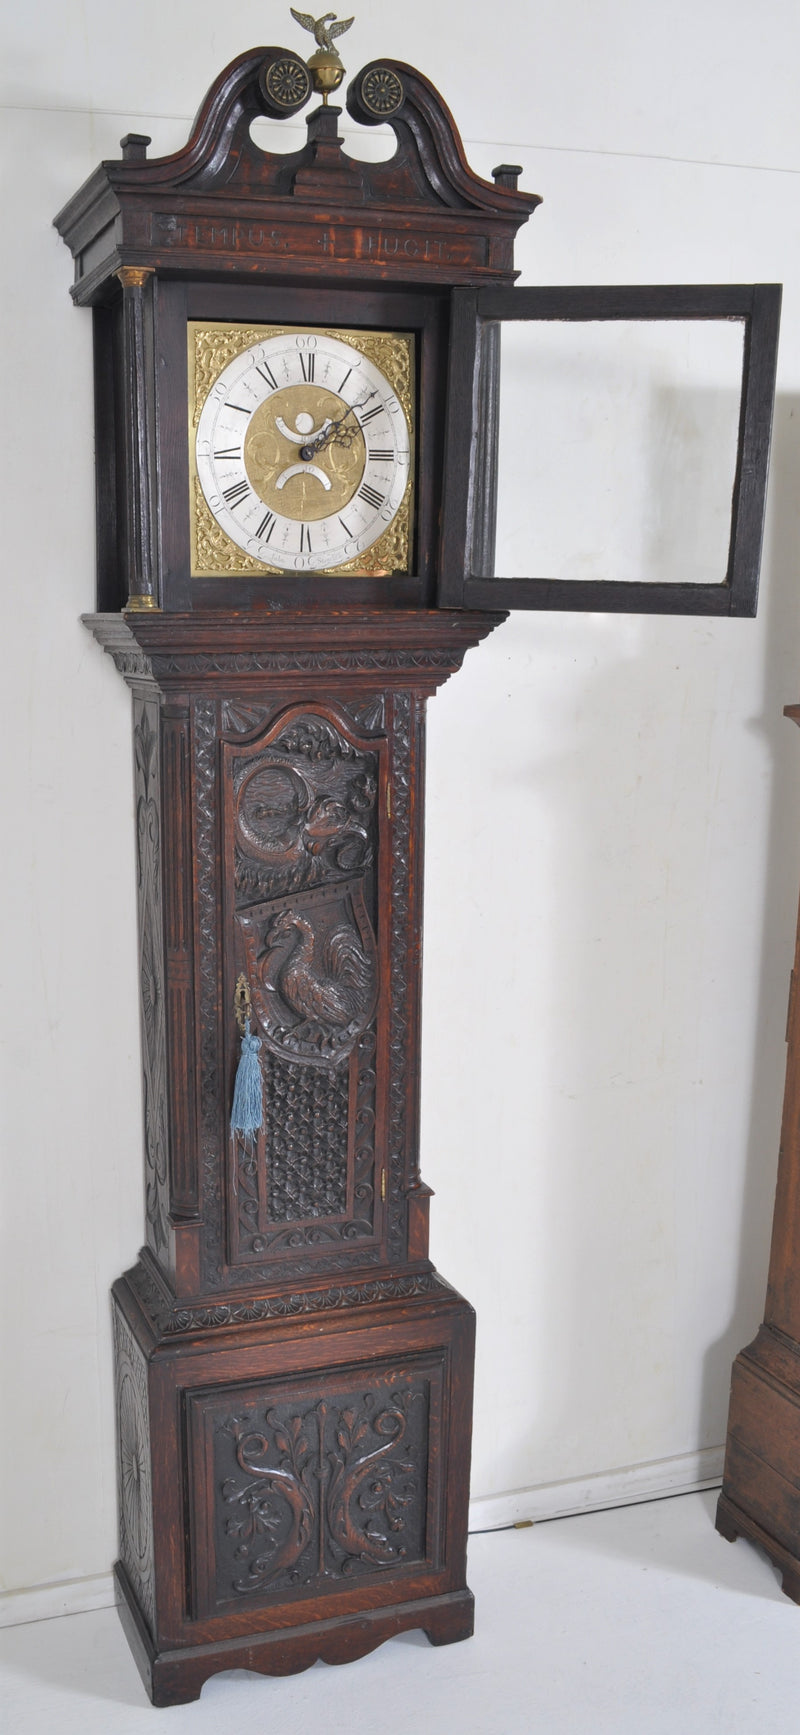 Antique English George III 30-Hour Carved Ebonized Oak Longcase/Grandfather Clock by John Stancliffe of Halifax (1706-1780), Circa 1760